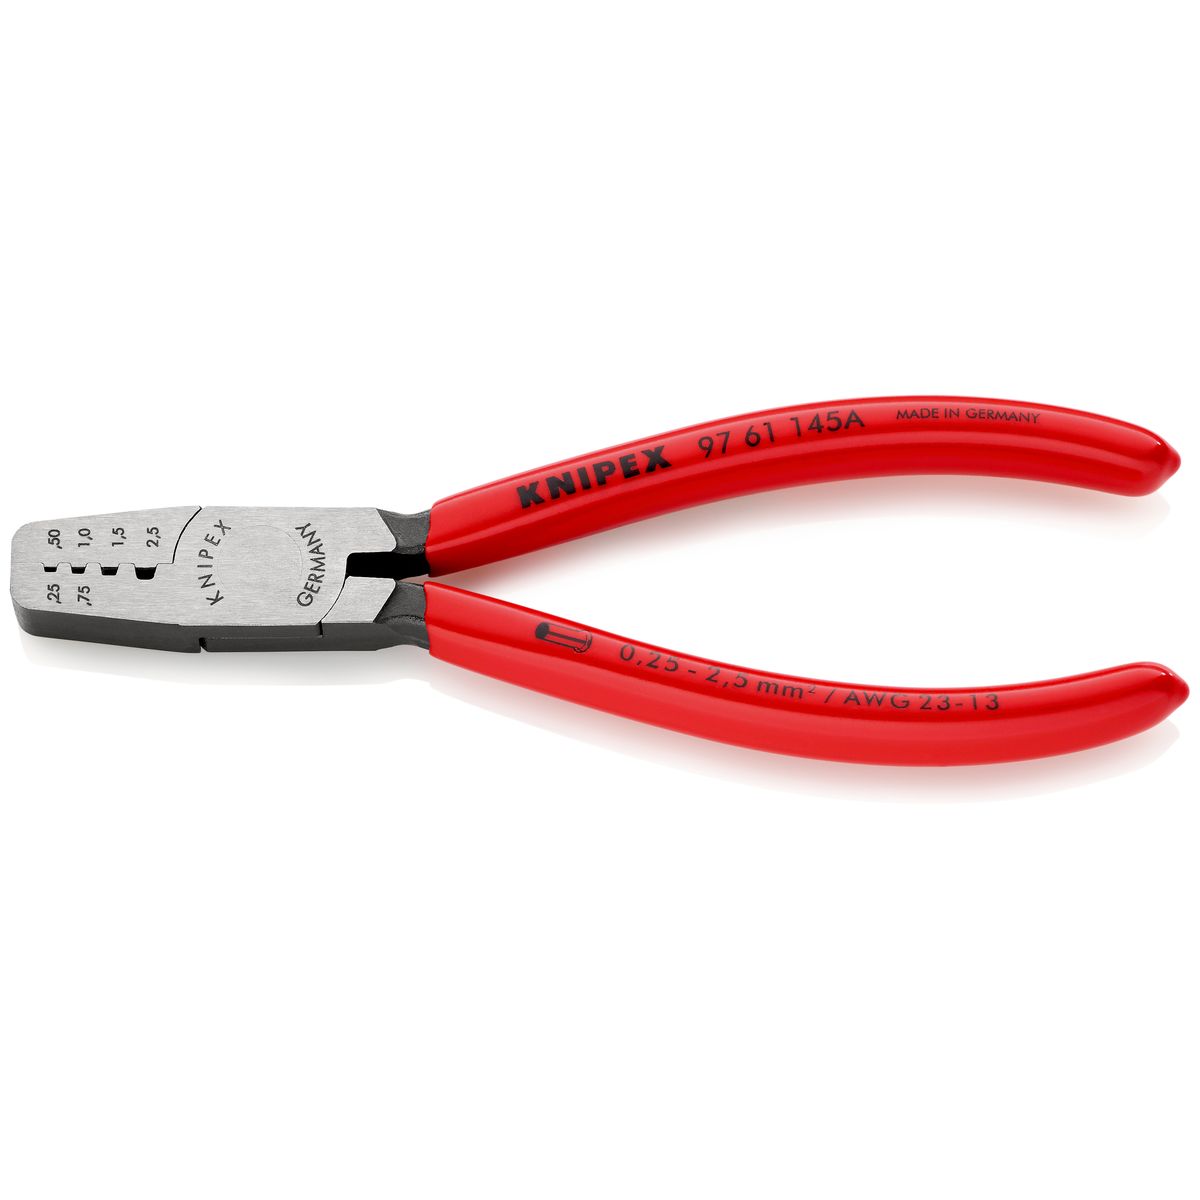 CRIMPING PLIERS F. CABLE LINKS 9761145A Knipex